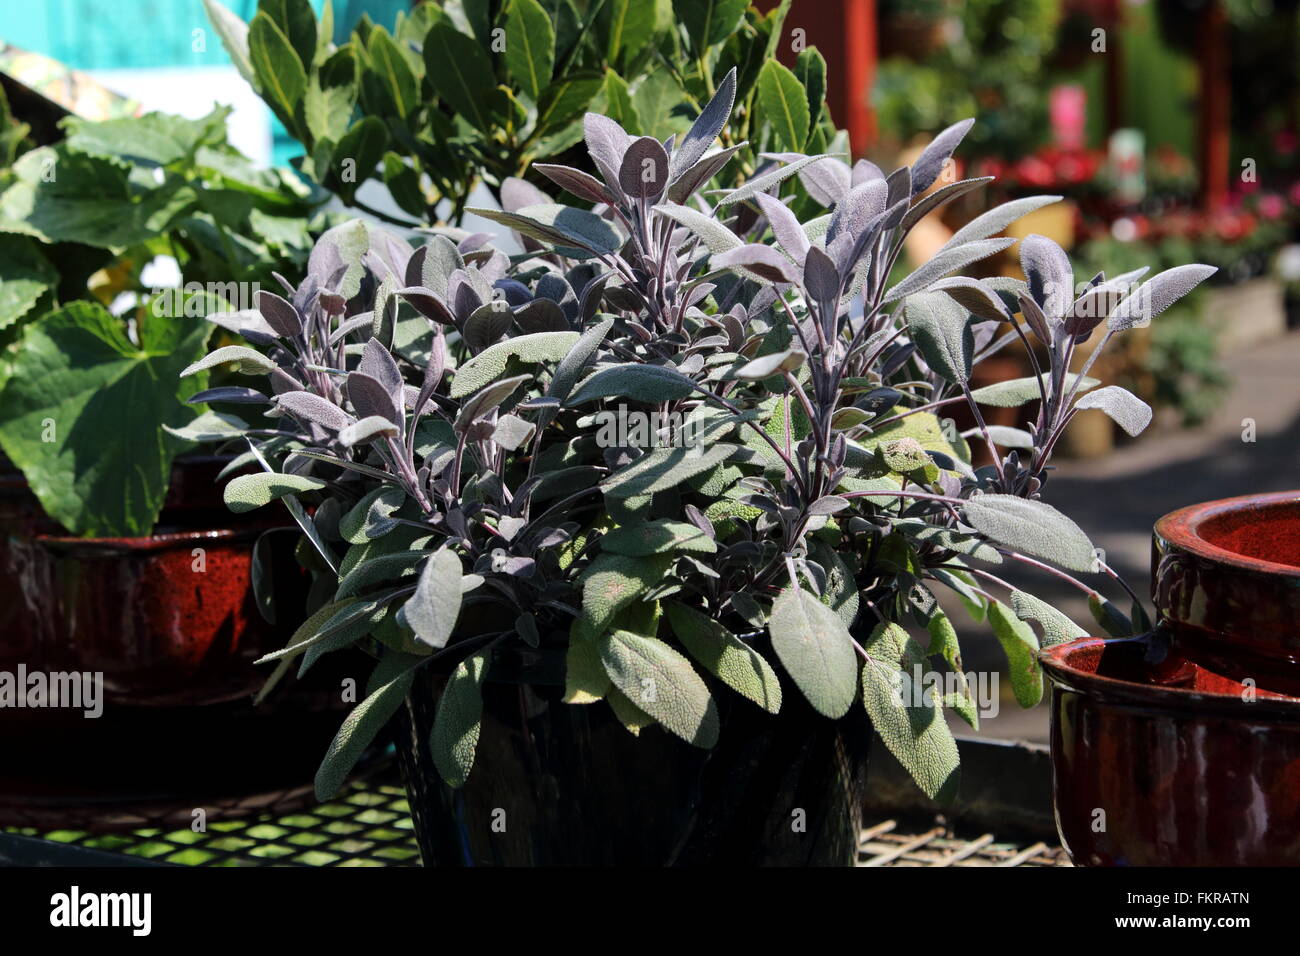 Growing Salvia officinalis Purpurascens or known as Purple Sage in a pot Stock Photo